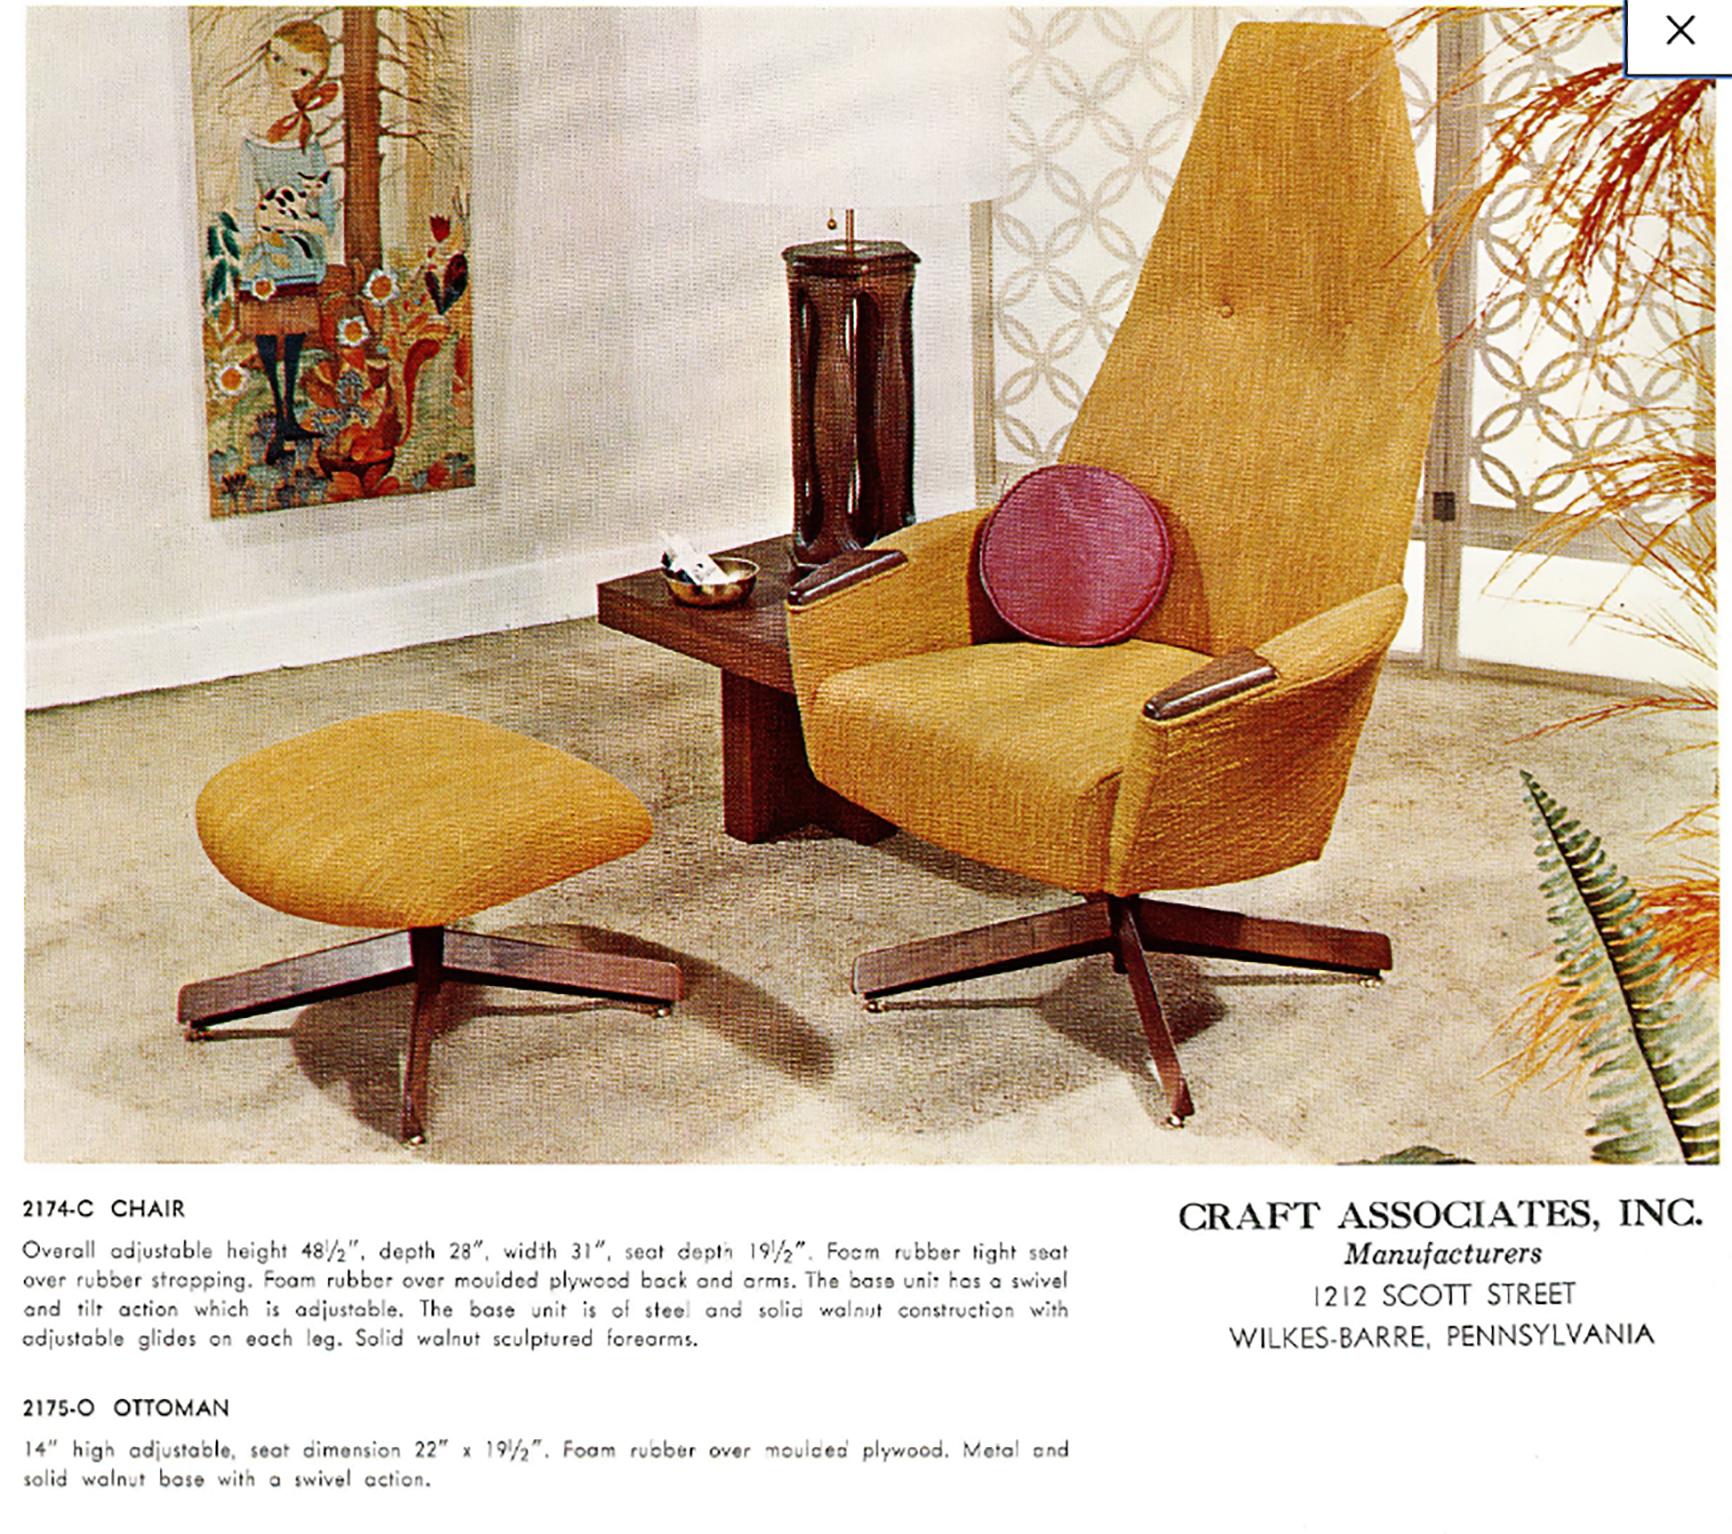 An uncommon full dynamic adjustable range chair. 20 images provided.
Adrian Pearsall 2174c (Chair) and 2175o (ottoman), circa 1965. Made by Craft Associates.
Tilt Mechanism can lock to keep chair fixed or offer wide range of reclining angles.